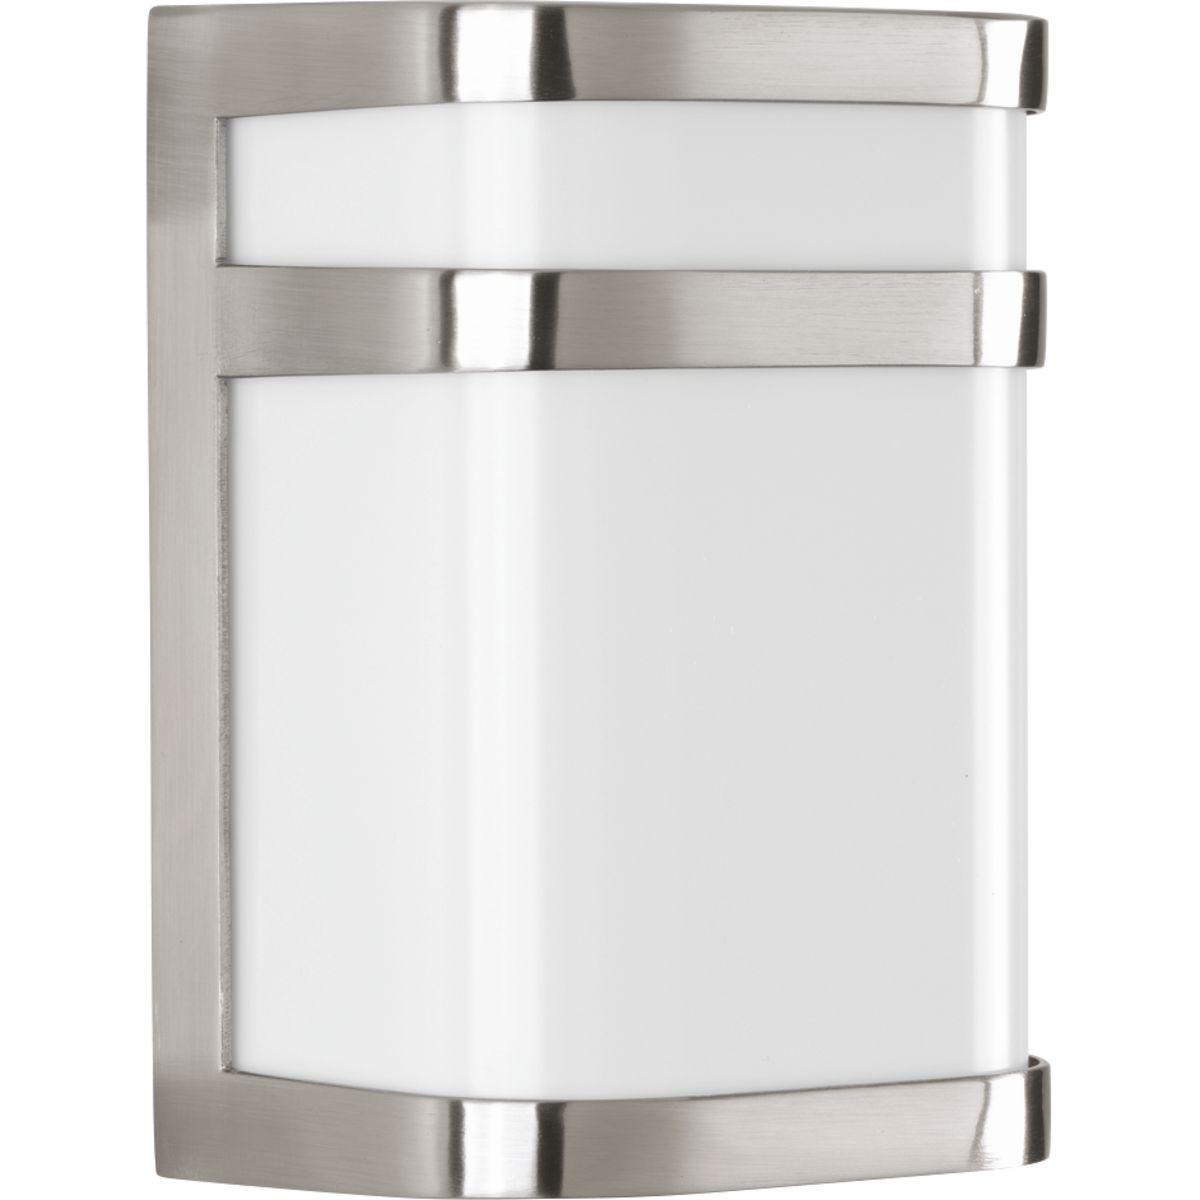 Hubbell P5800-0930K9 Clean lines are up front and center for these modern LED outdoor sconces. Valera features a die-cast aluminum frame and matte white, acrylic diffuser. Energy efficient LED source offers 3000K color temperature and 90+CRI output. Title 24 compliant. One-li